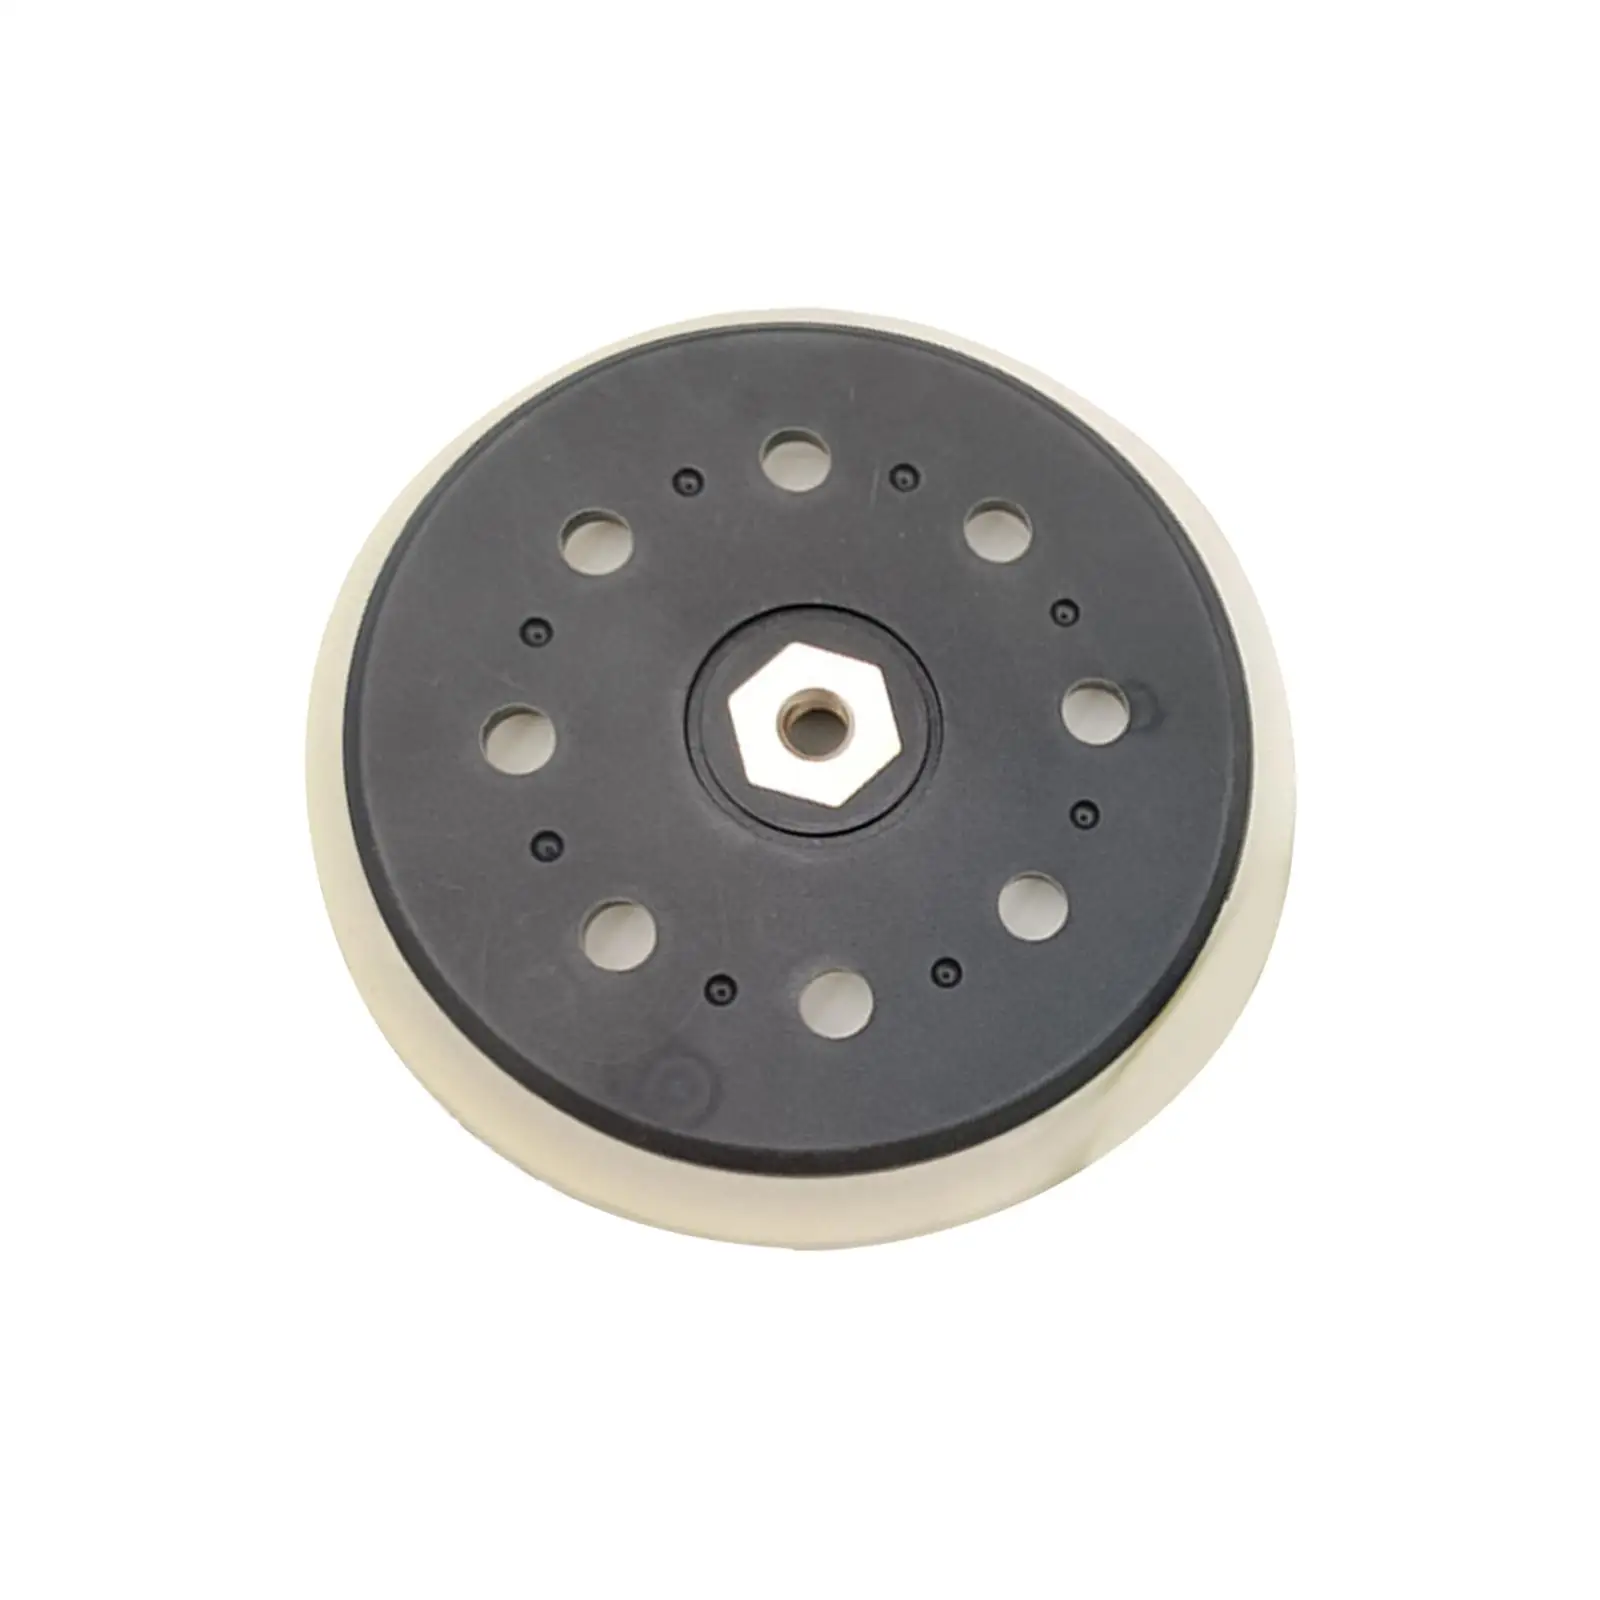 Sanding Backing Plate Pad 6 inch Sander Accessories Backing Grinding Polishing Pad Disc with Mount Hole for Carving for BO6050J